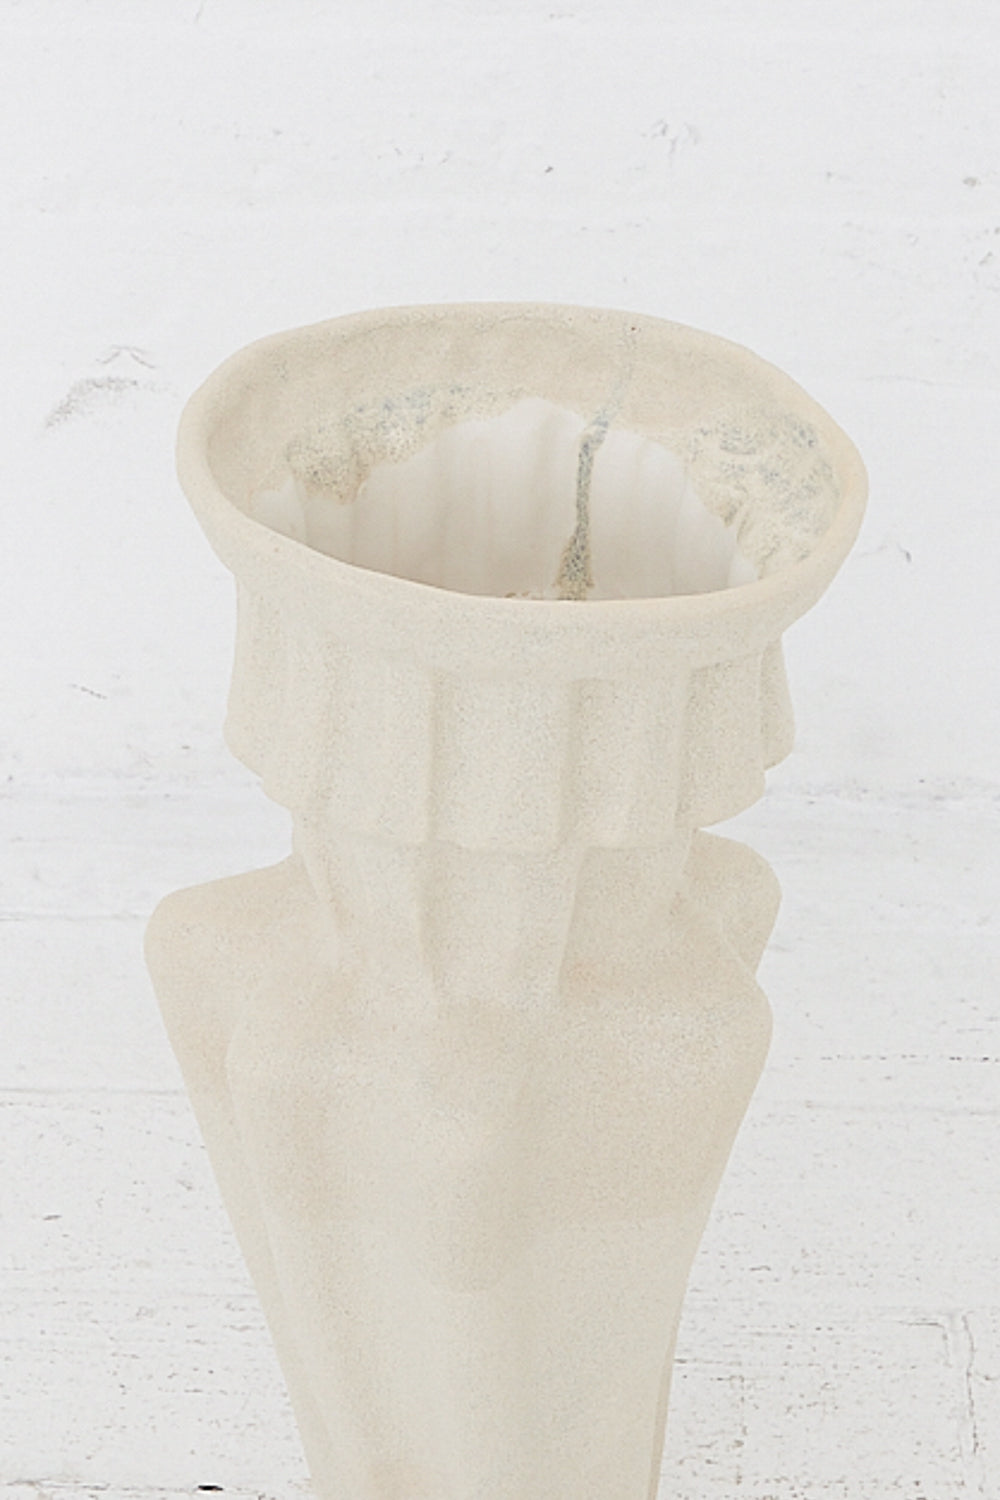 A white, hand-built ANK Ceramics Column Vessel in White with a white glaze sitting on a wooden table.